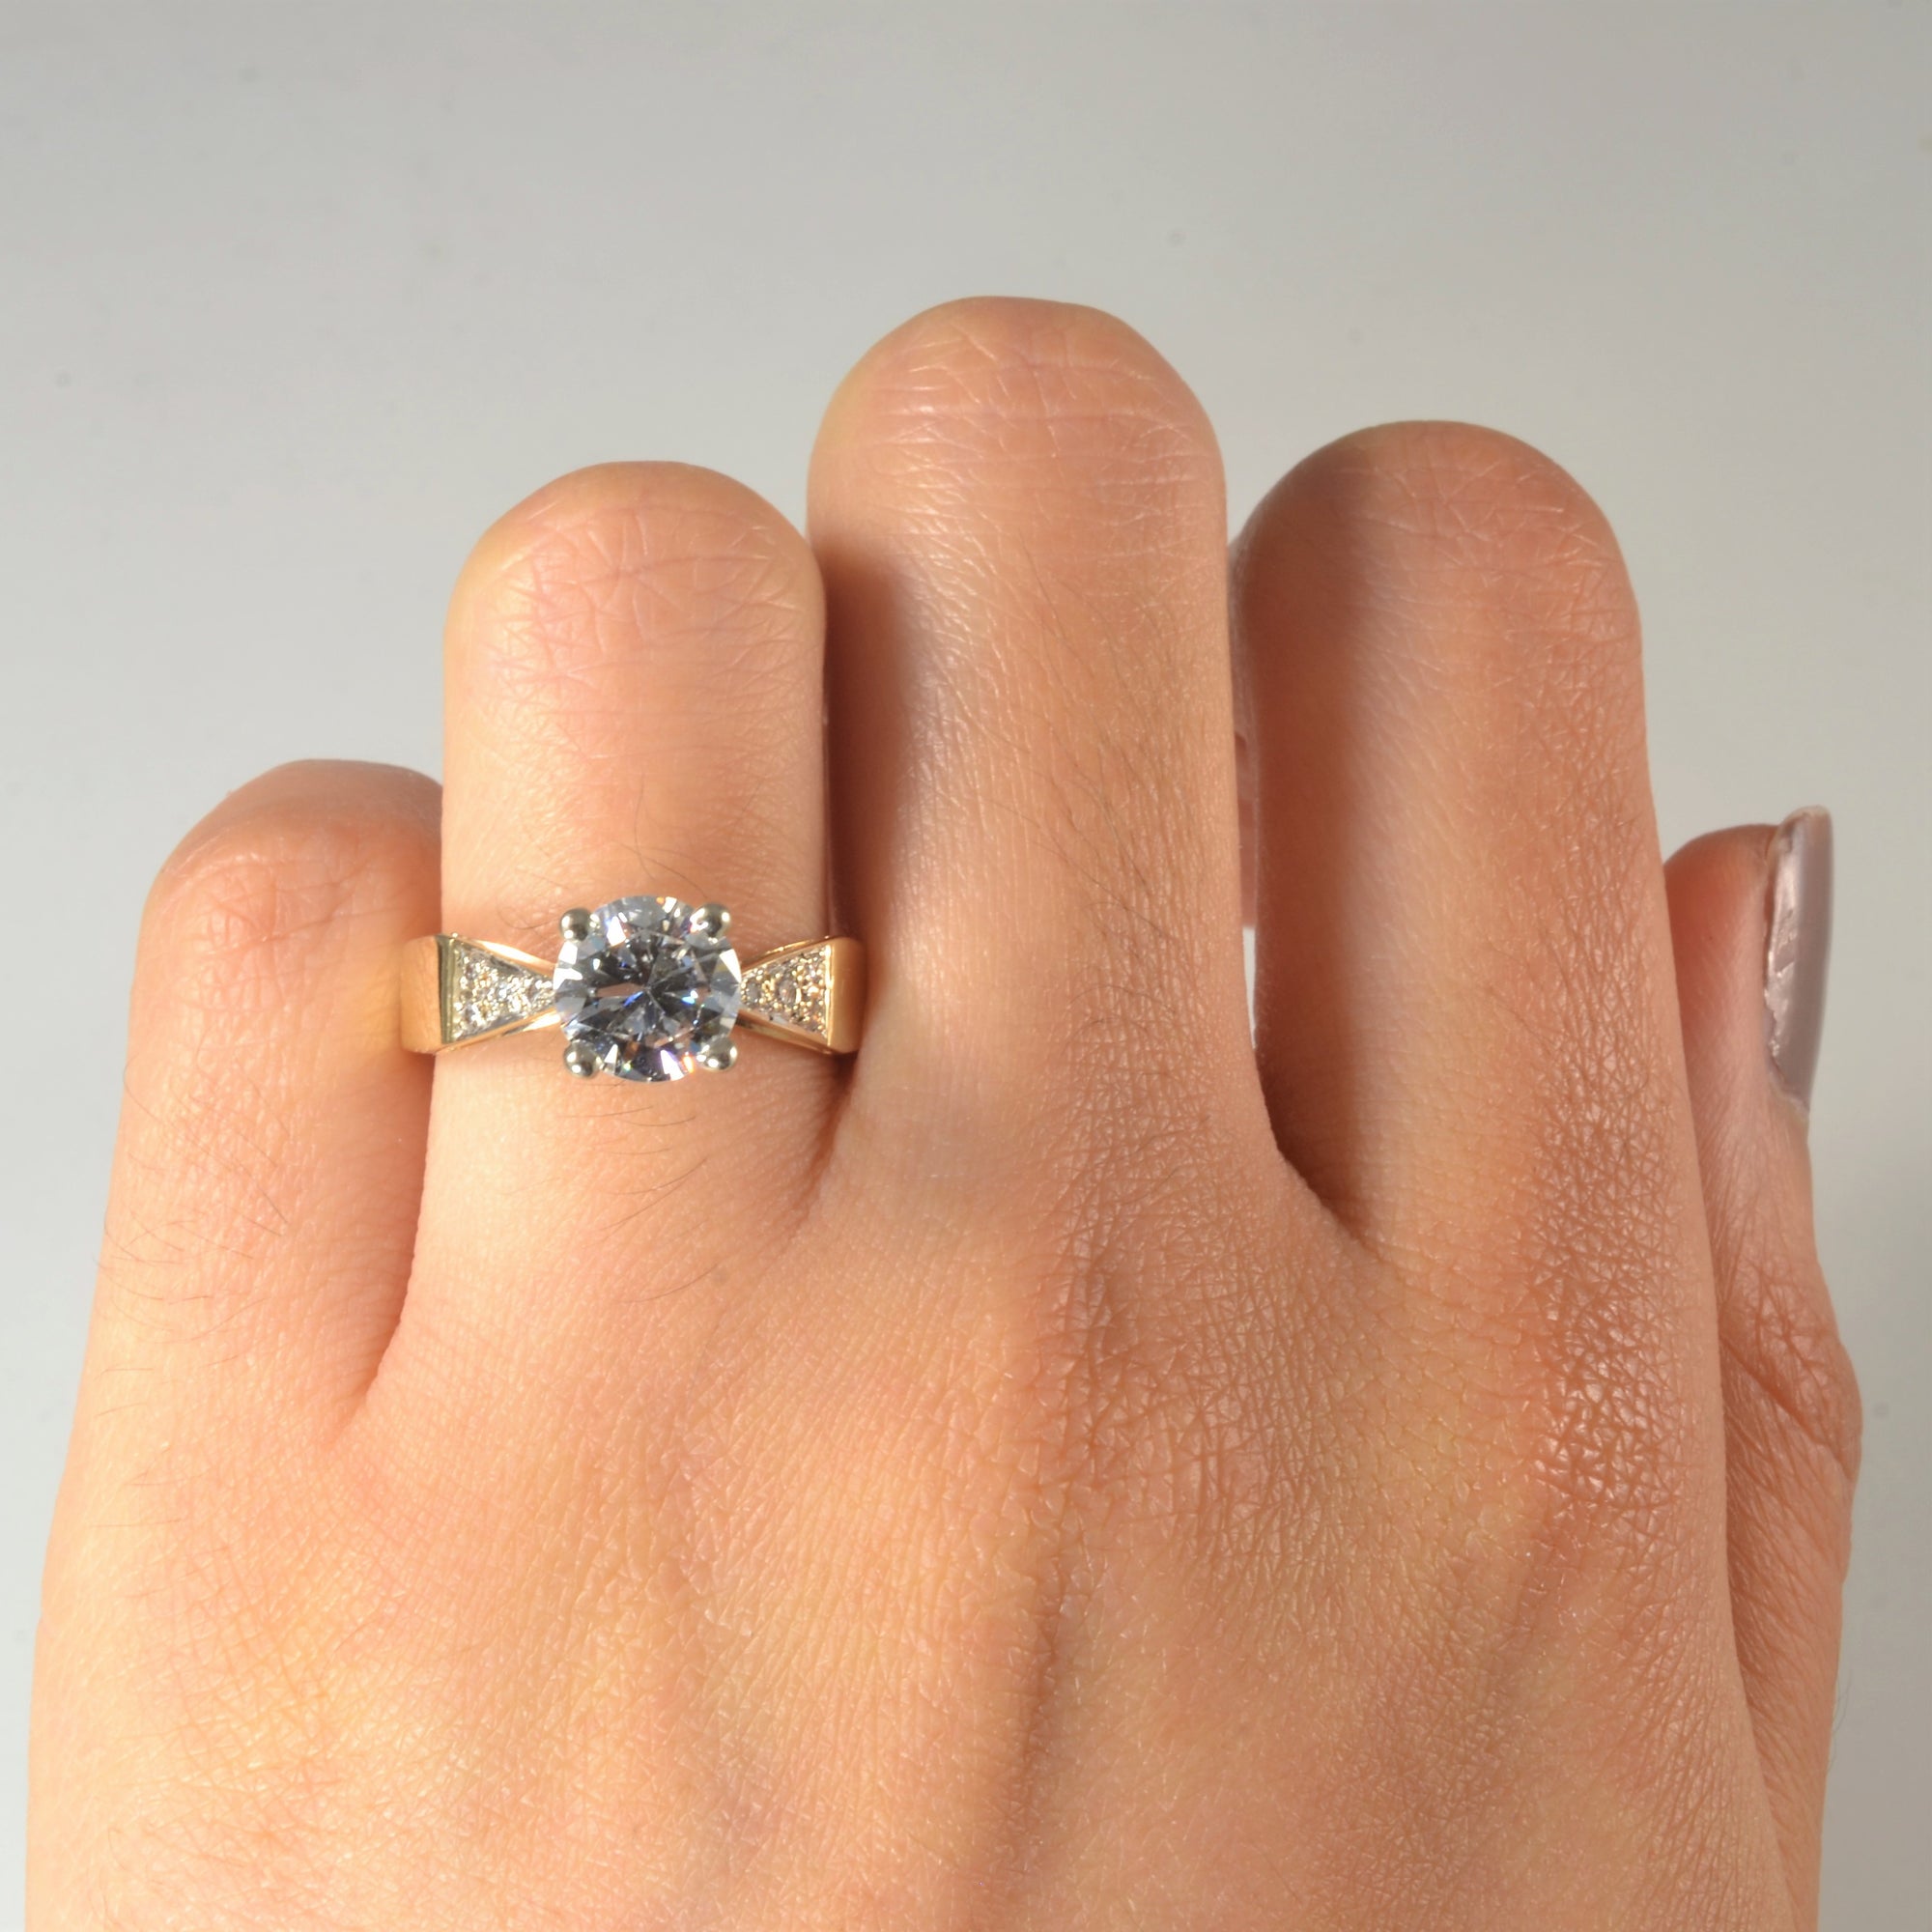 Tapered Pave Diamond Engagement Ring | 1.58ctw | SZ 5.5 |